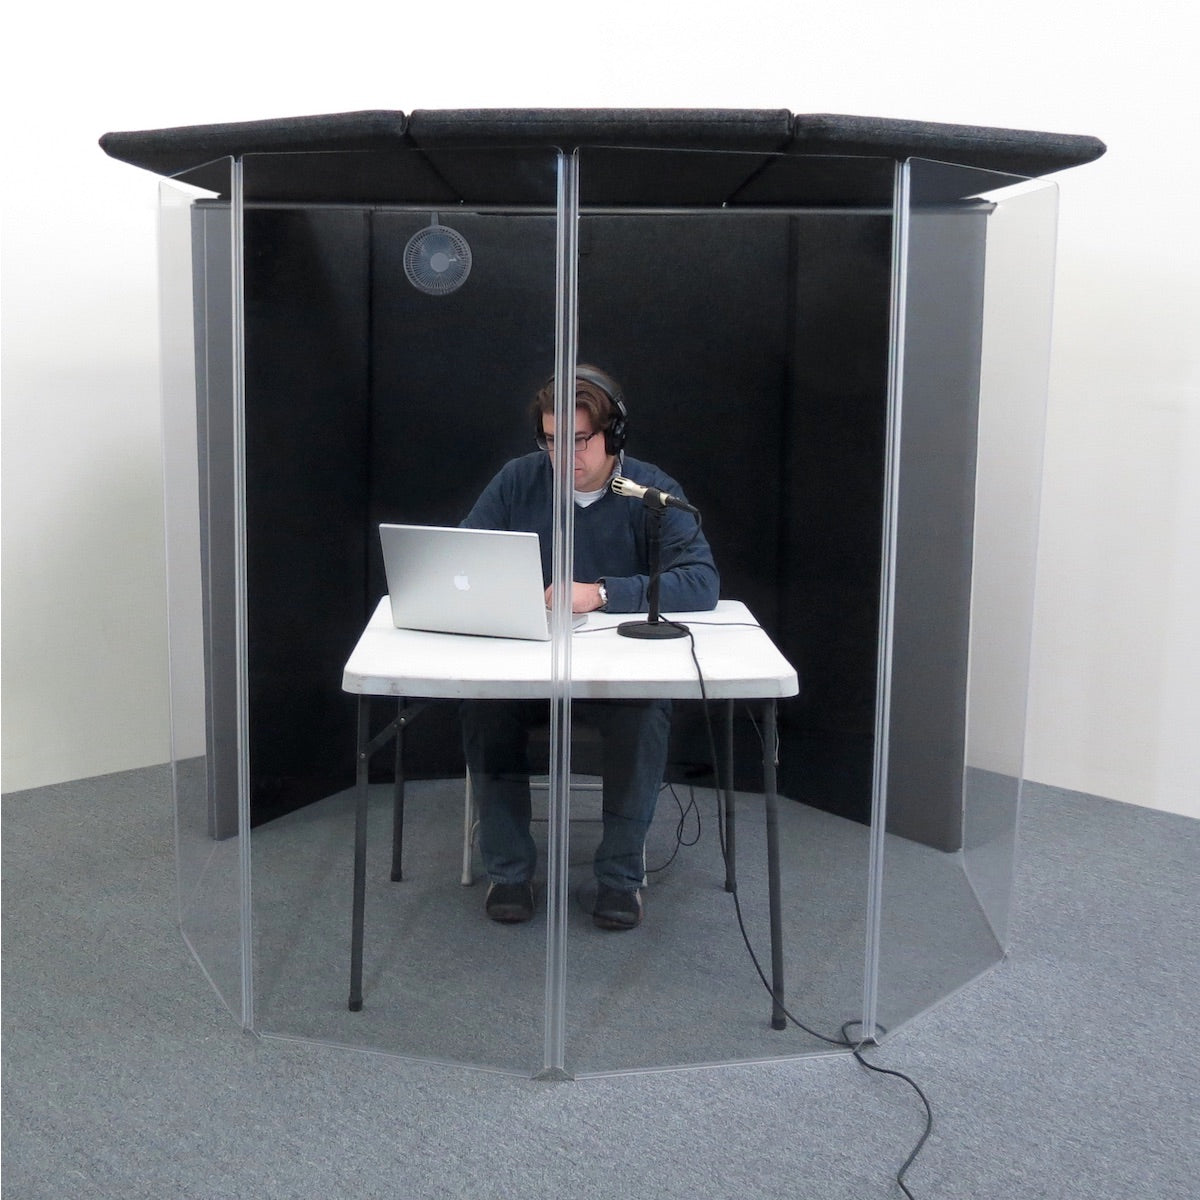 ClearSonic IPI - IsoPac I Vocal Isolation Booth Package, with person